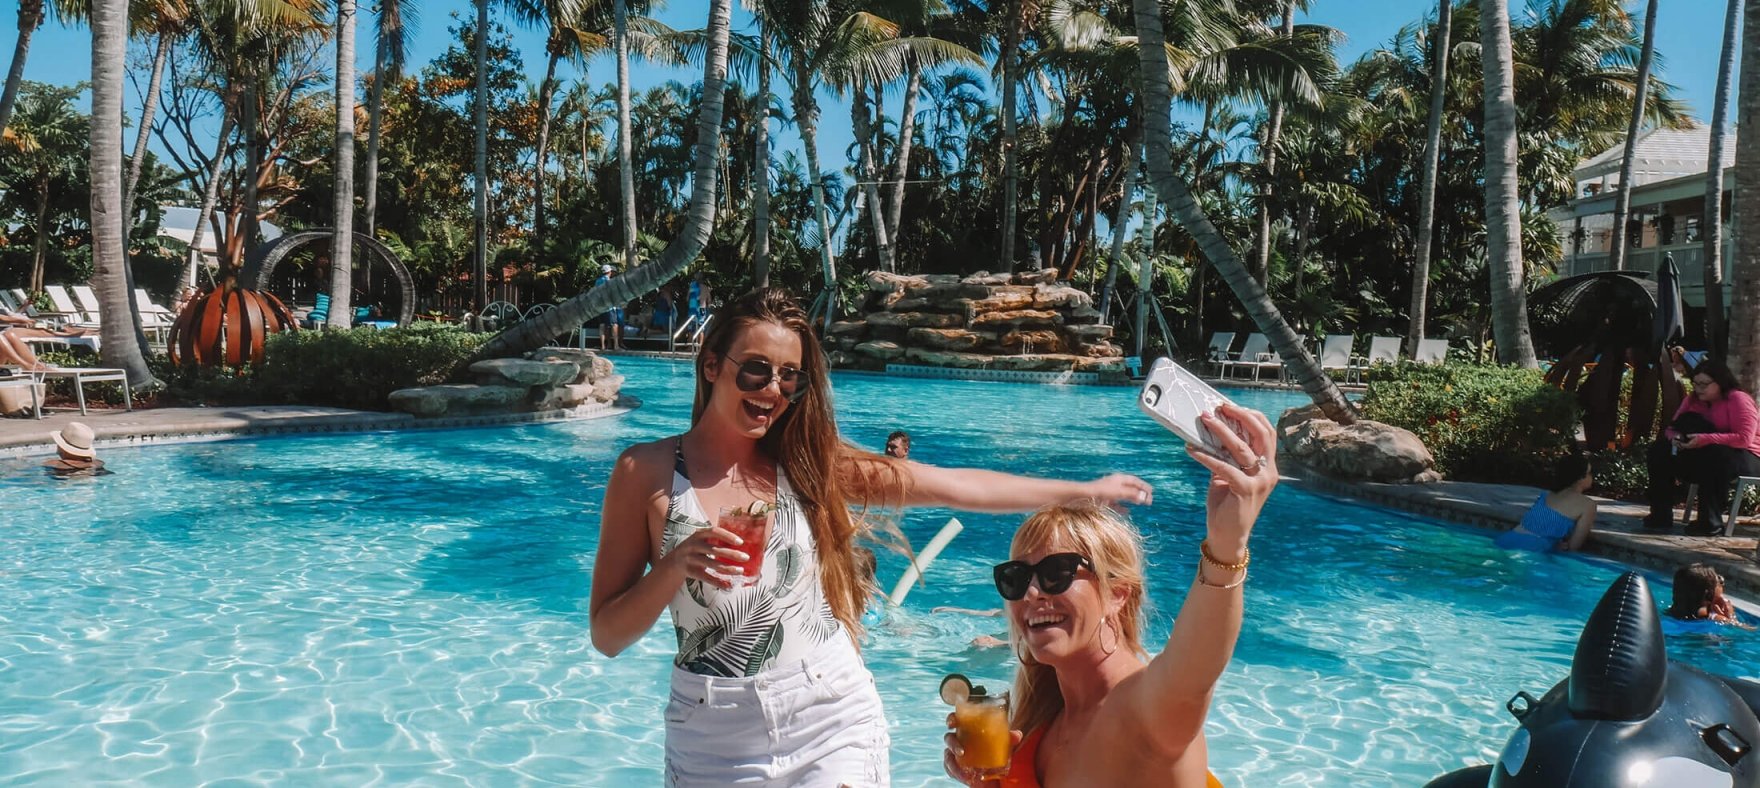 Two women posing for a selfie with drinks in their hands with the outdoor pool in the background